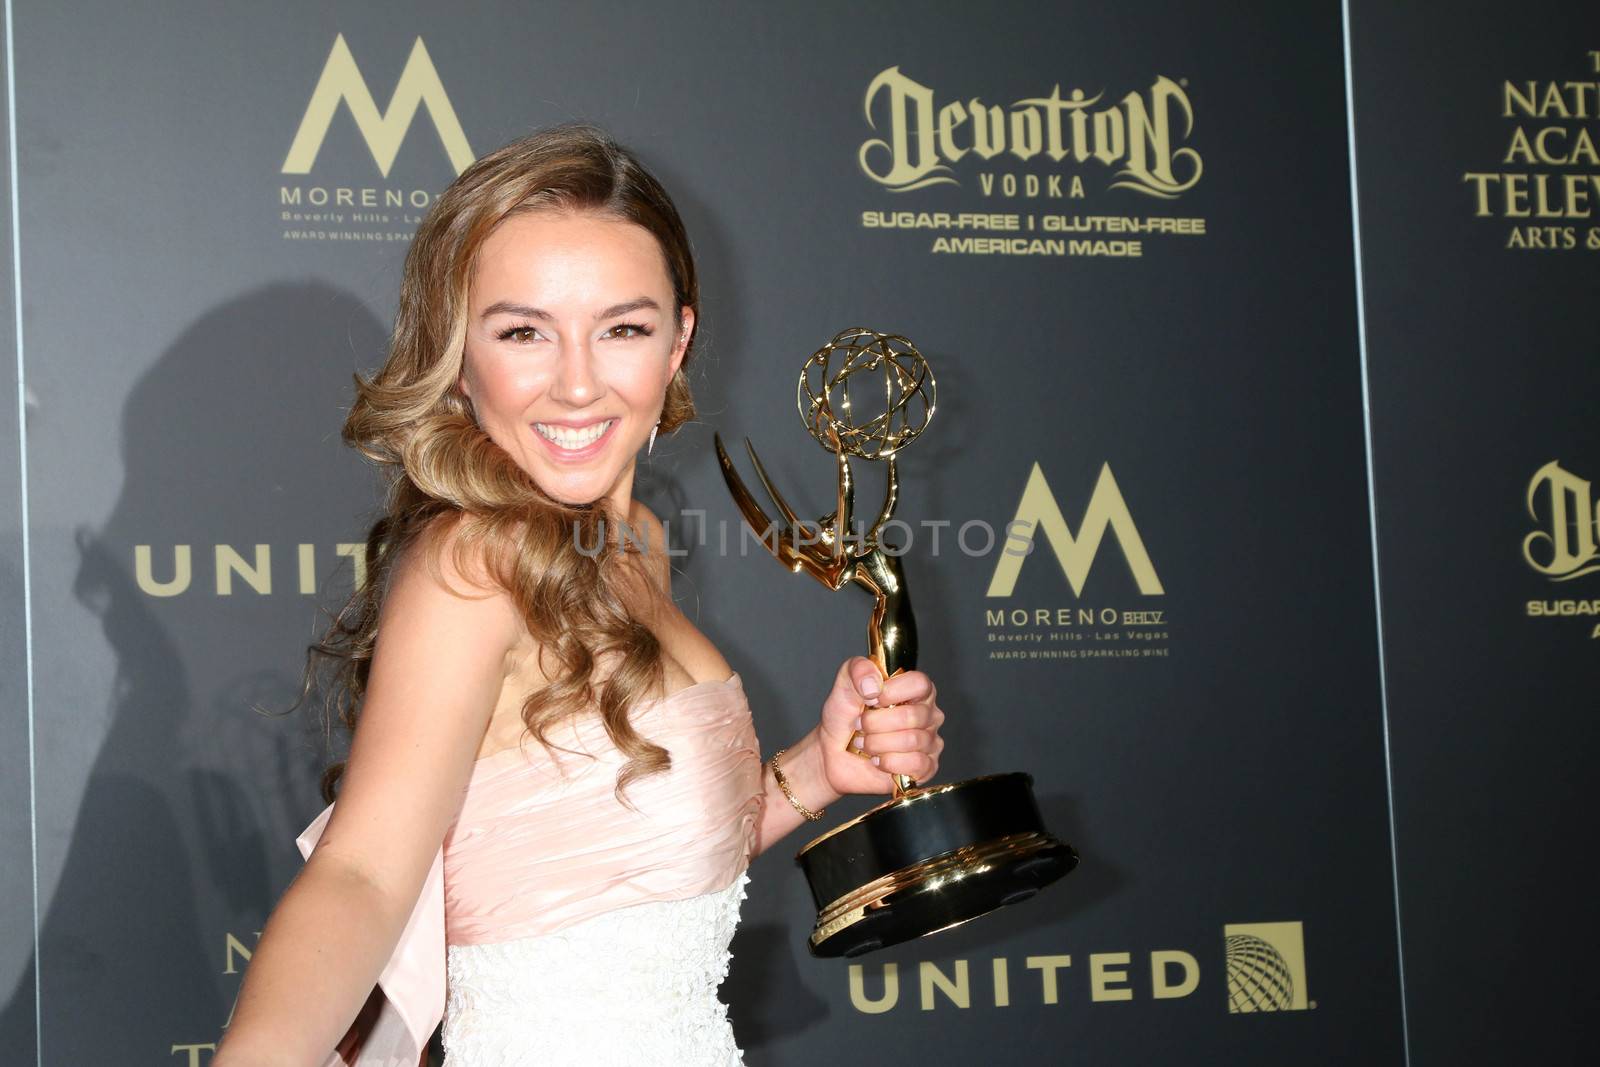 Lexi Ainsworth, Outstanding Younger Actress in a Drama Series, General Hospital
at the 44th Daytime Emmy Awards - Press Room, Pasadena Civic Auditorium, Pasadena, CA 04-30-17/ImageCollect by ImageCollect